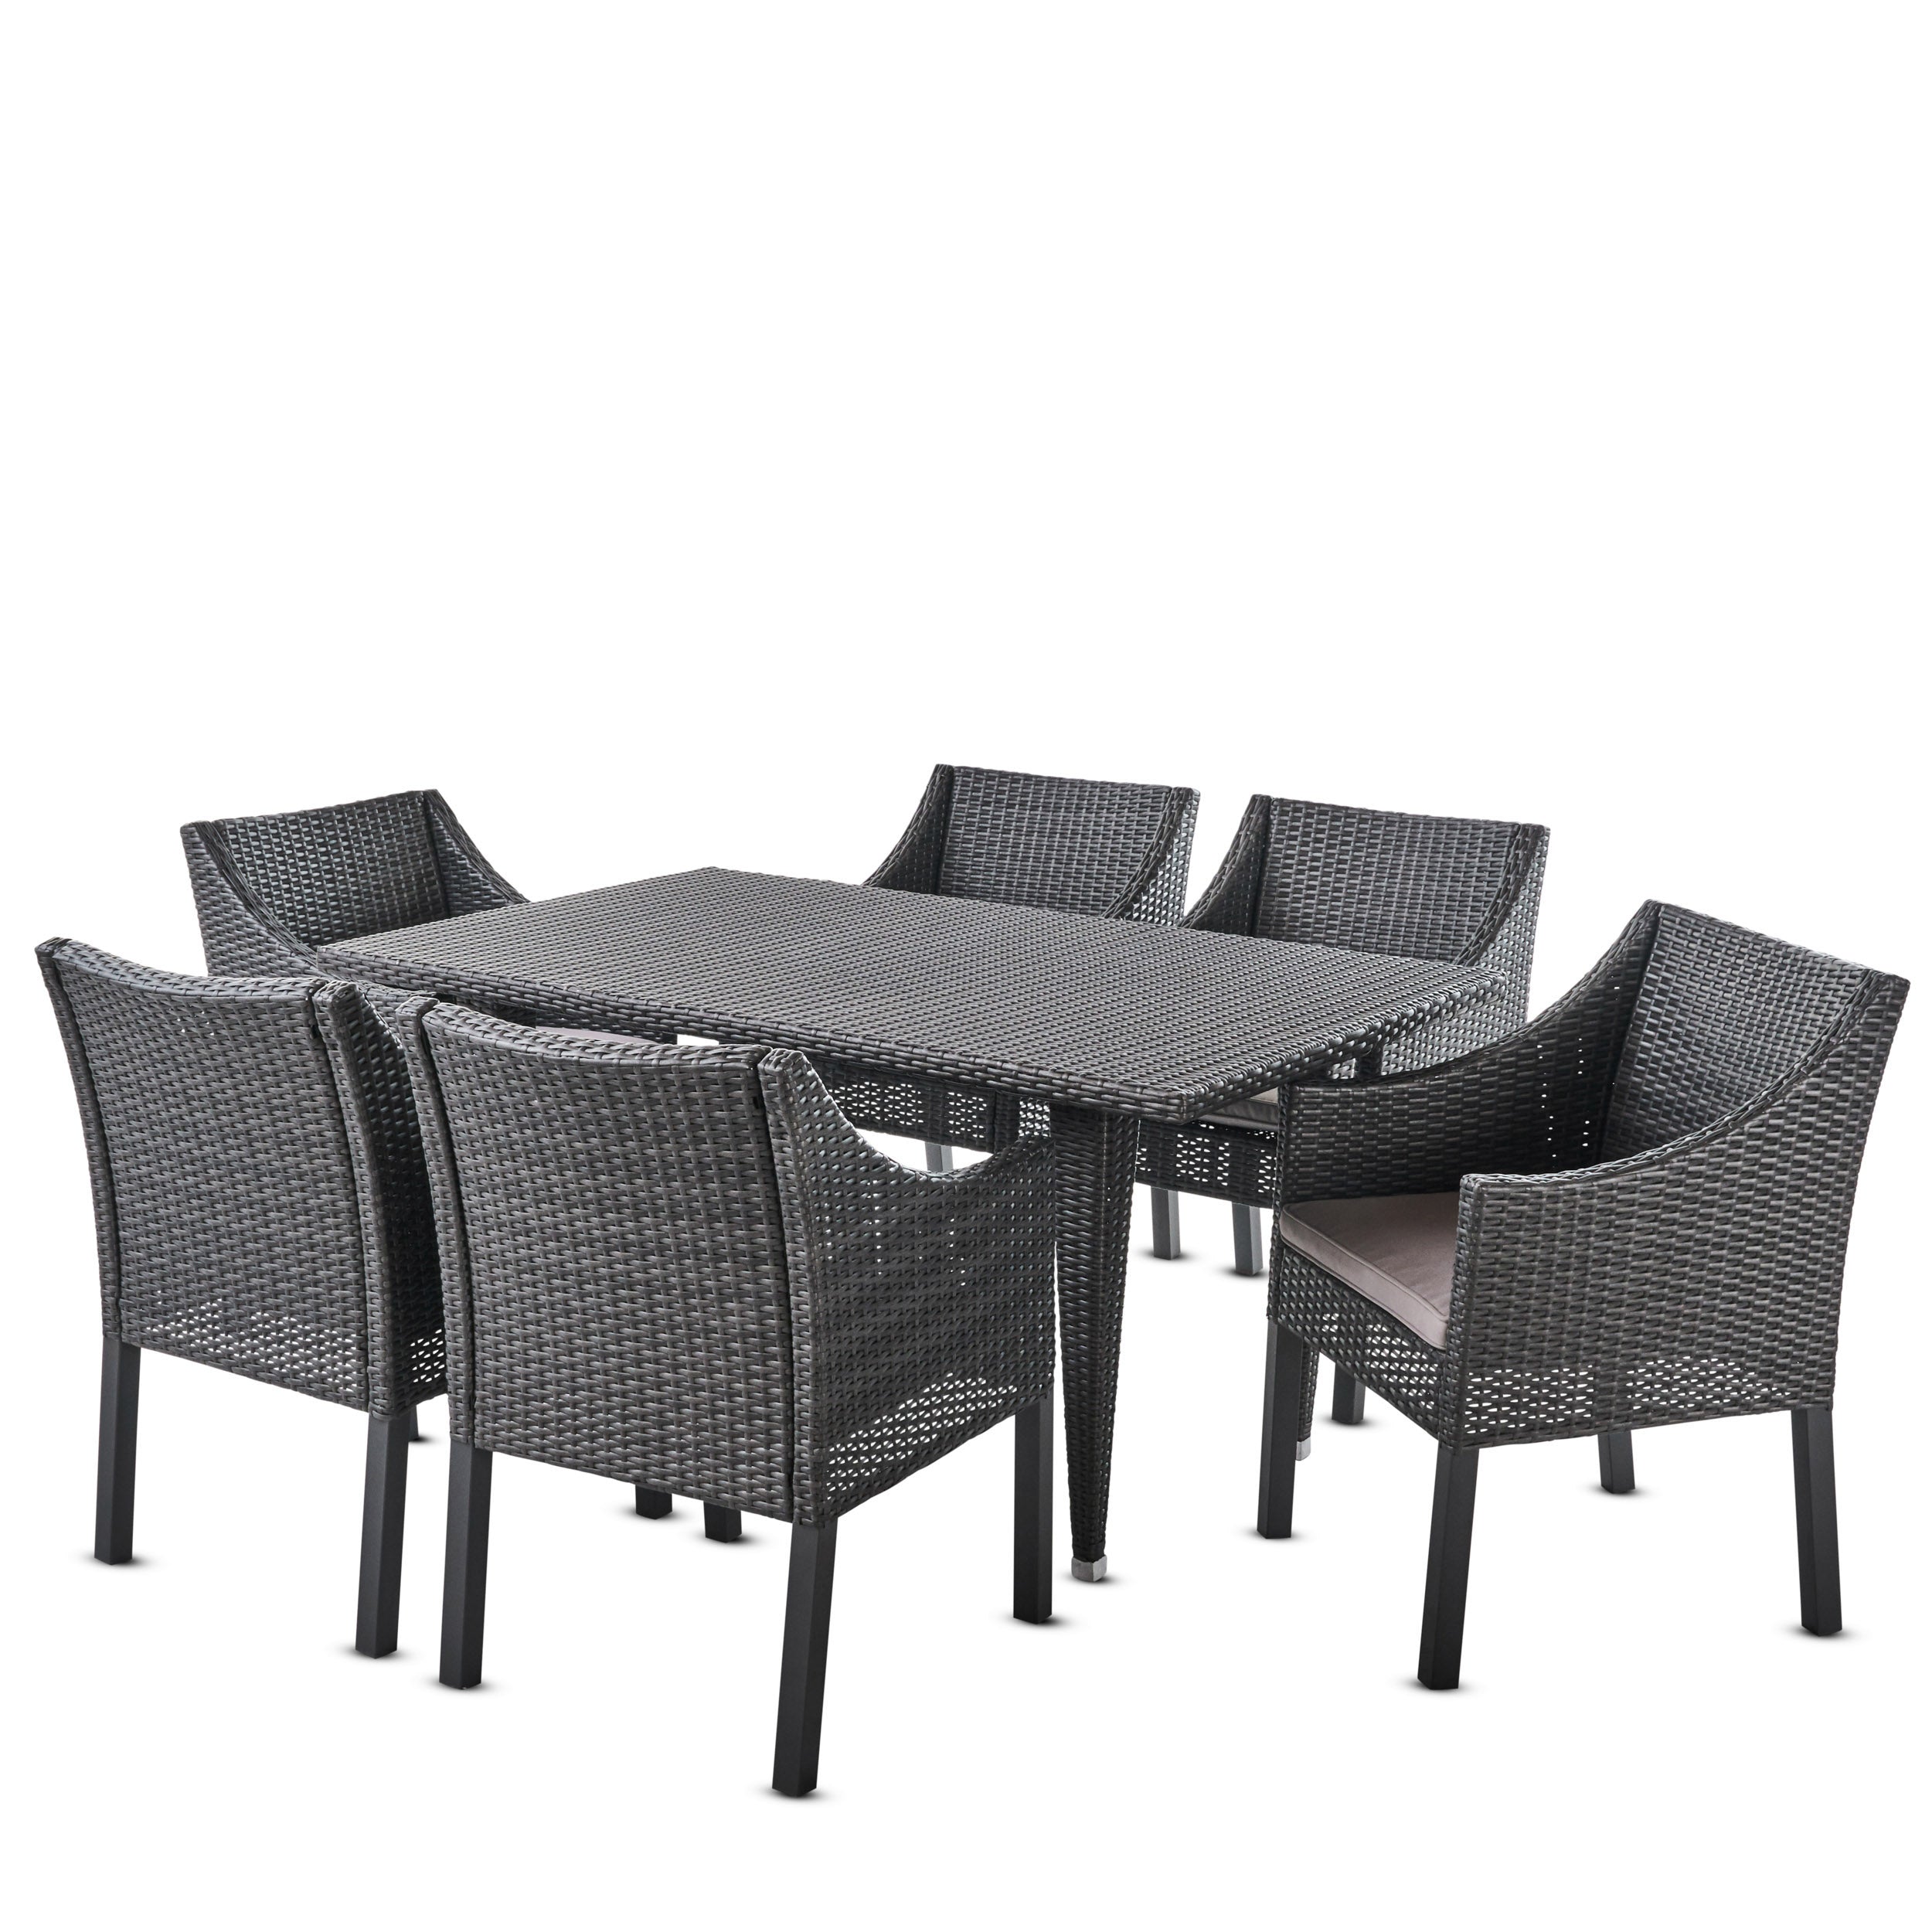 Alanna Outdoor 7 Piece Gray Wicker Dining Set with Water Resistant Cushions Default Title